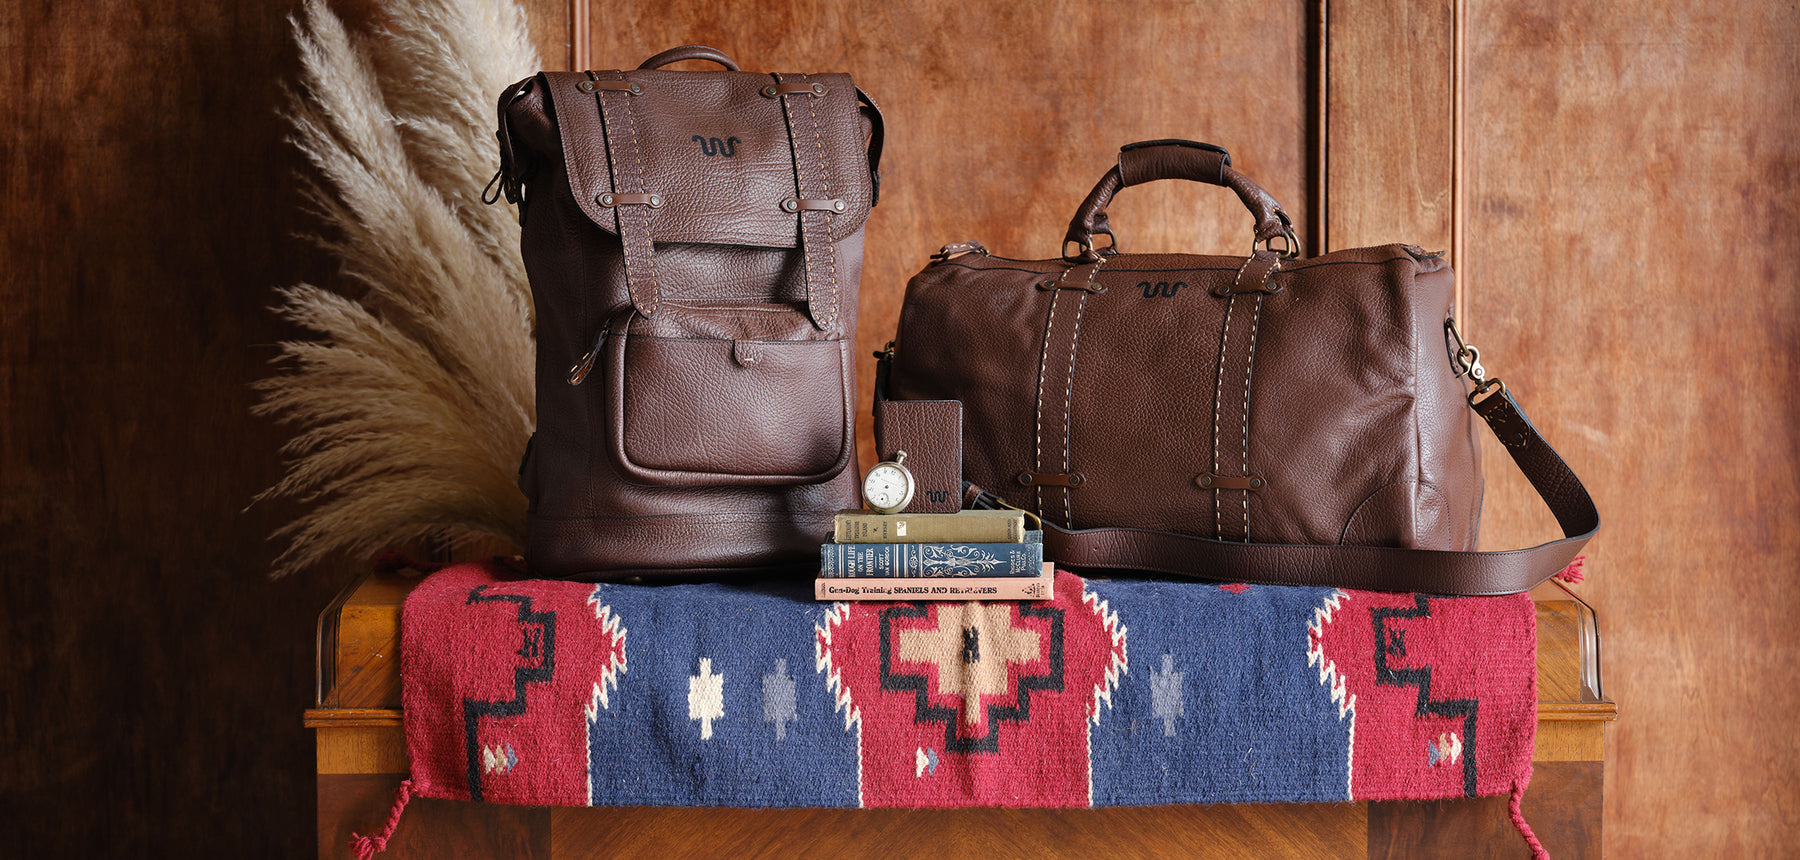 King Ranch's brown leather backpack and brown leather duffle bag are on the blue and red colored blanket.